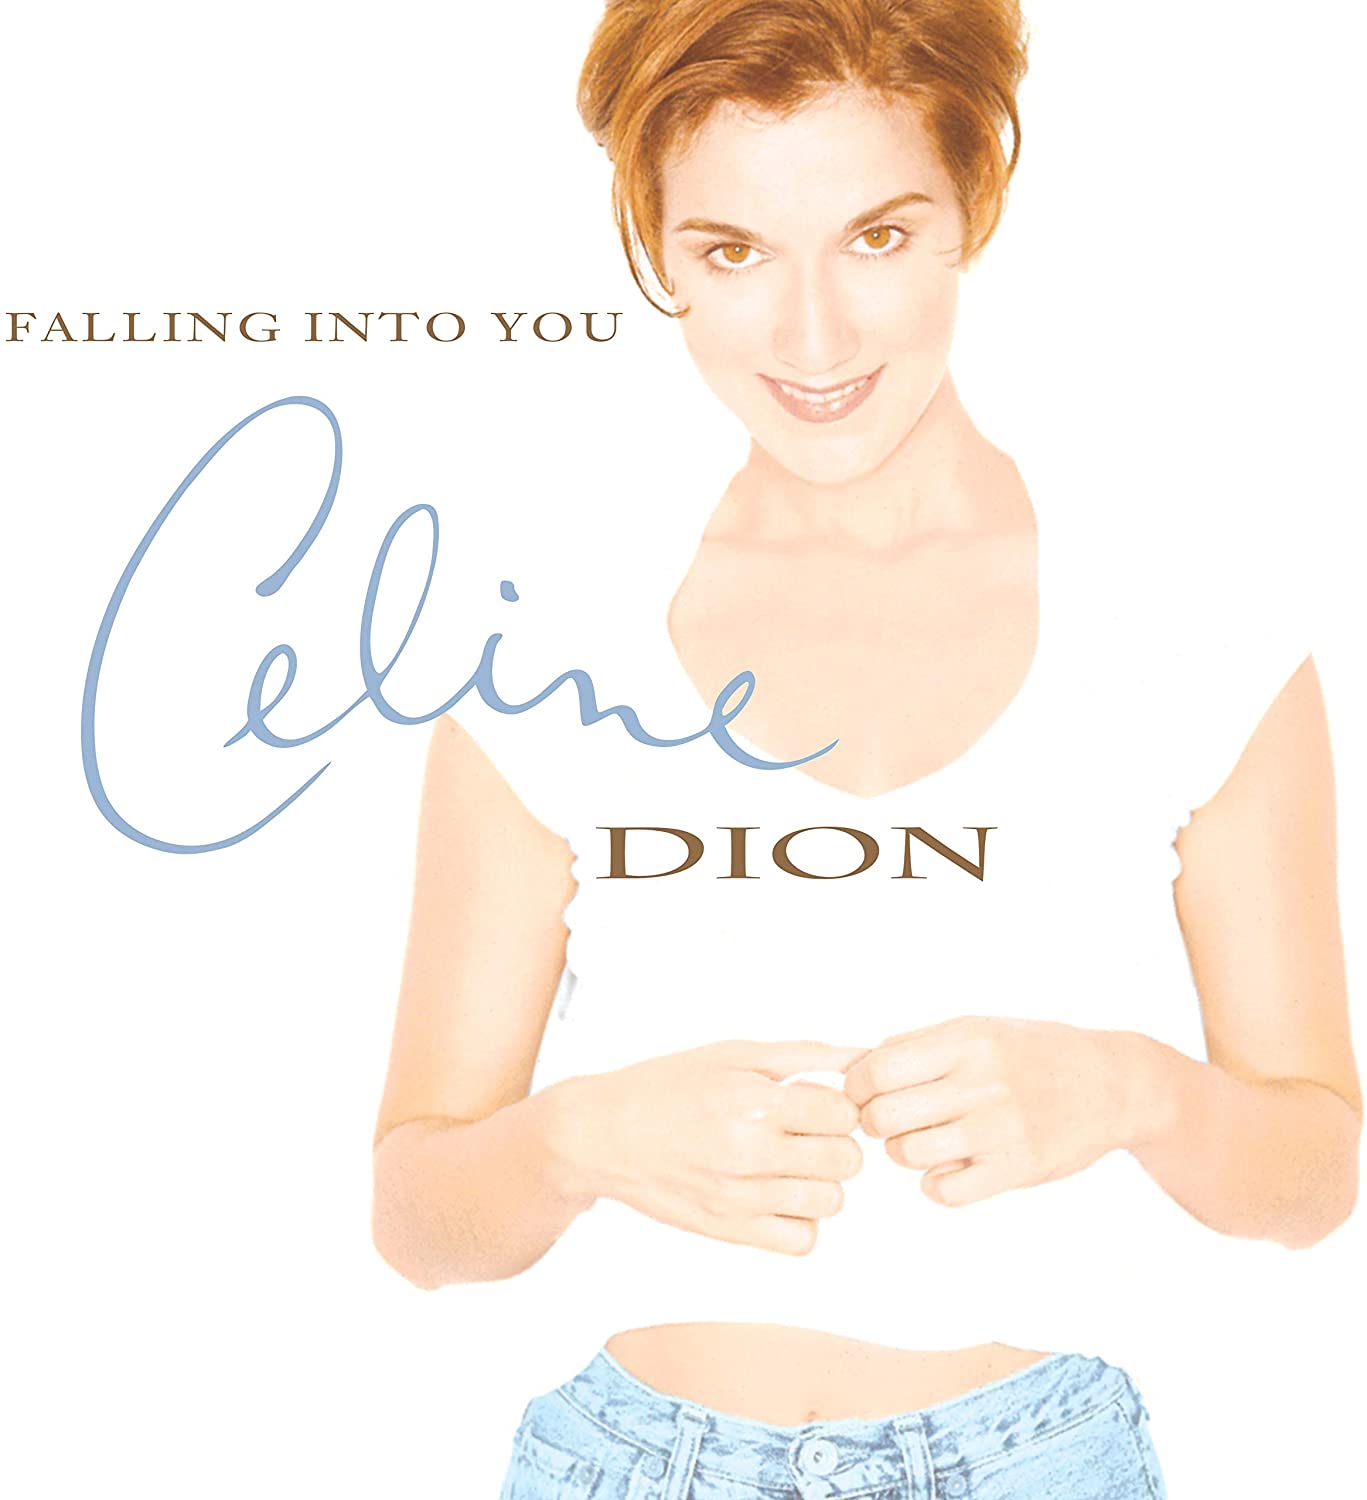 Celine Dion Falling Into You